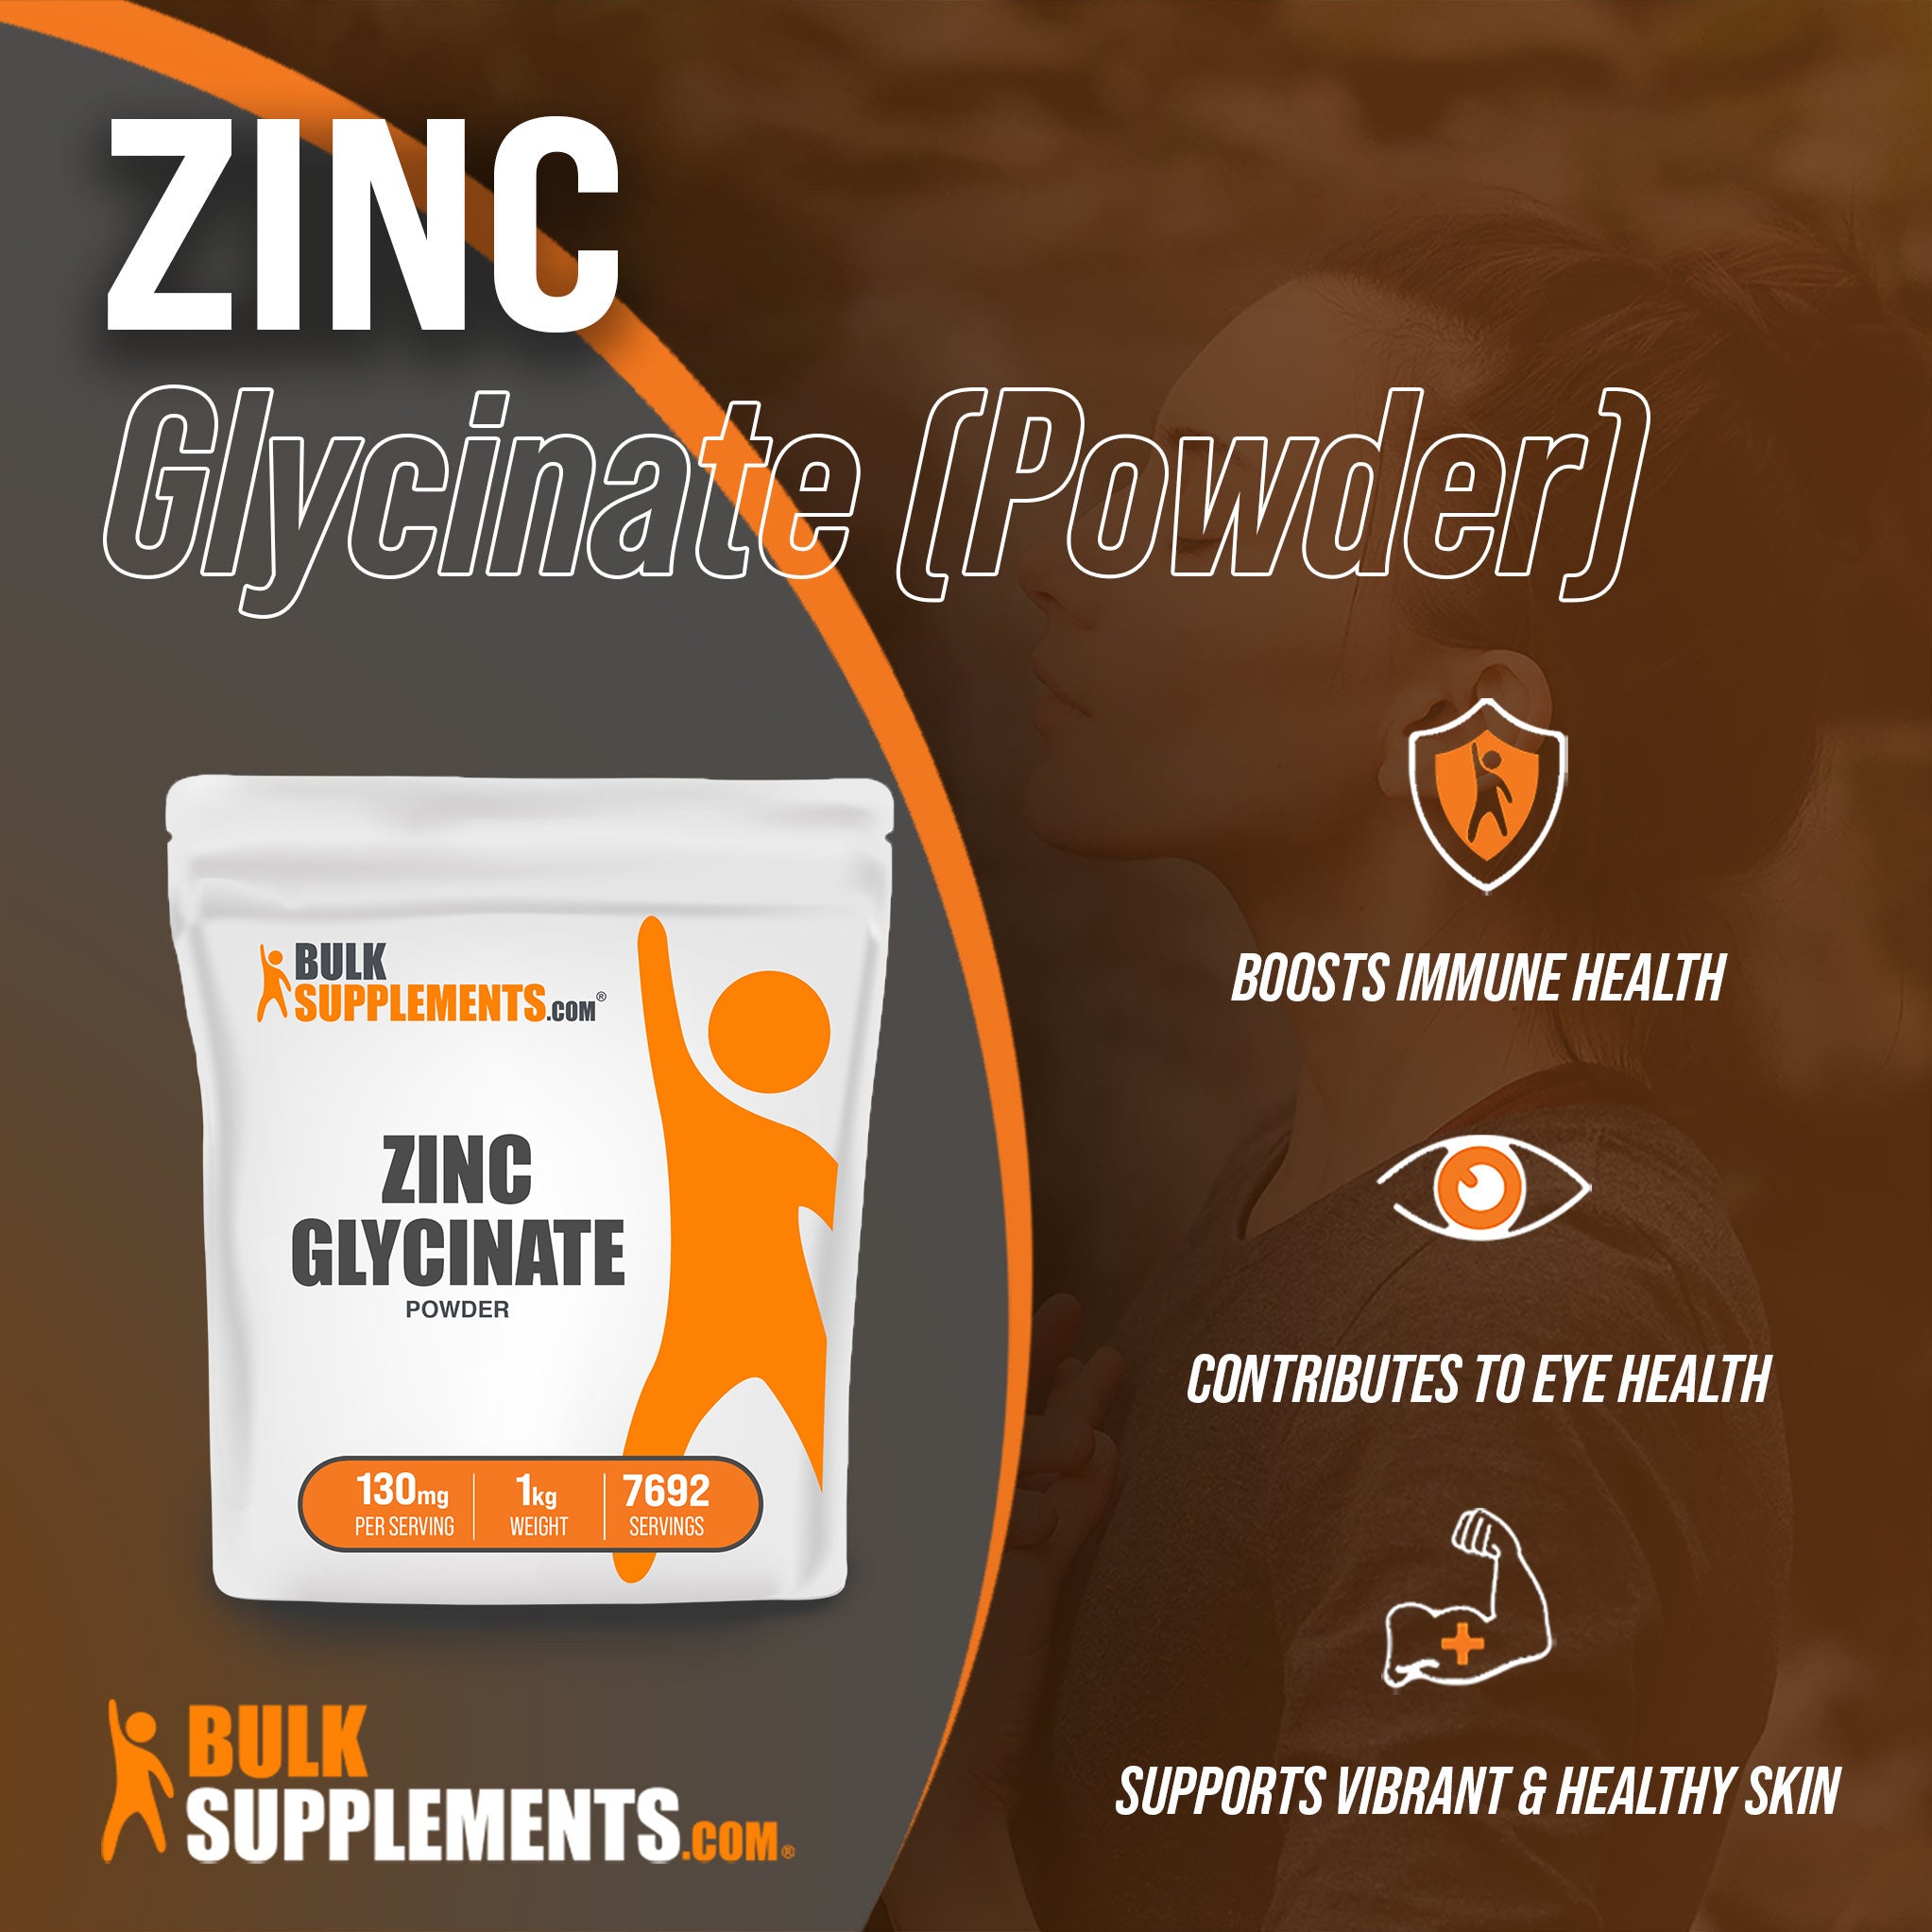 Benefits of Zinc Glycinate: boosts immune health, contributes to eye health, supports vibrant and healthy skin